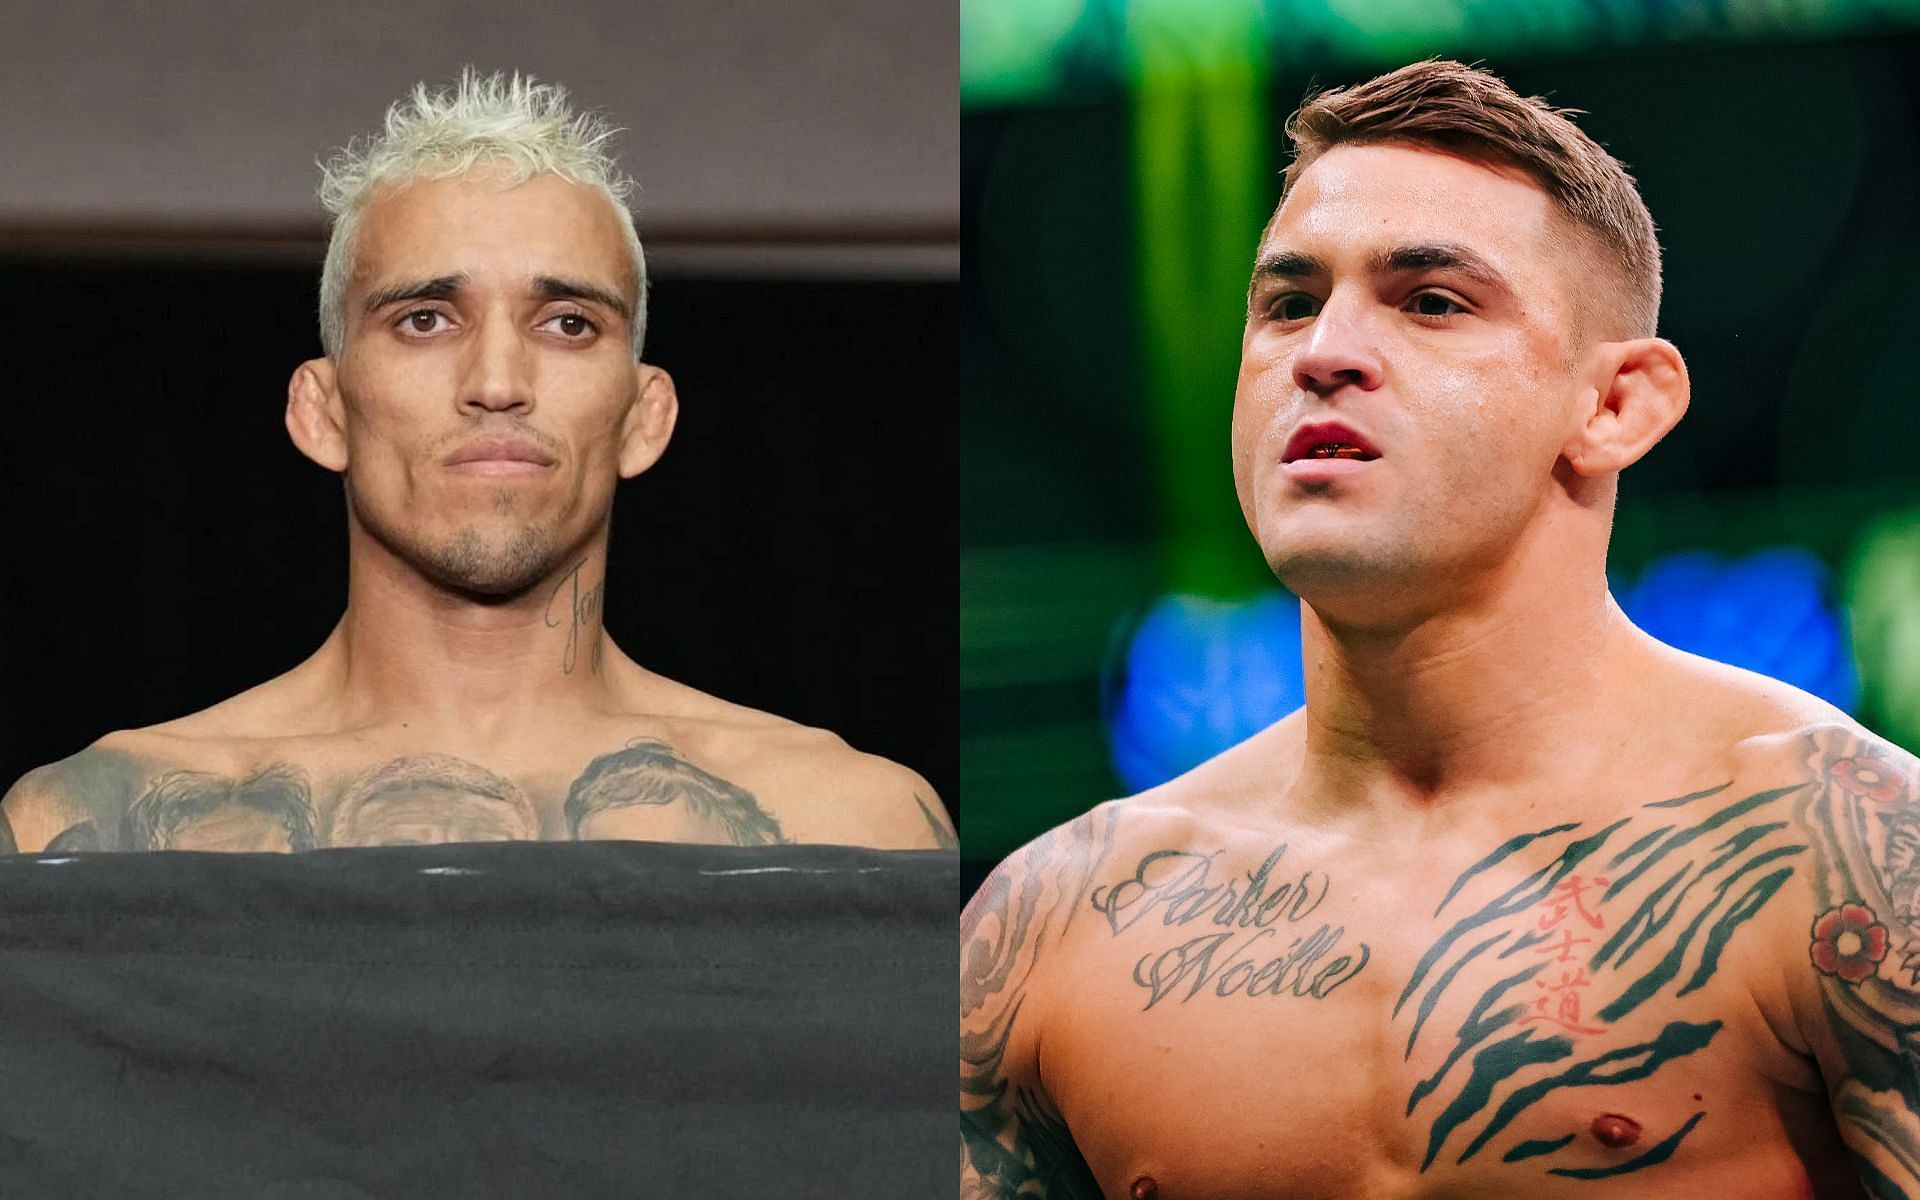 Charles Oliveira (left) and Dustin Poirier (right) (Images via Twitter/@UFC and Getty)